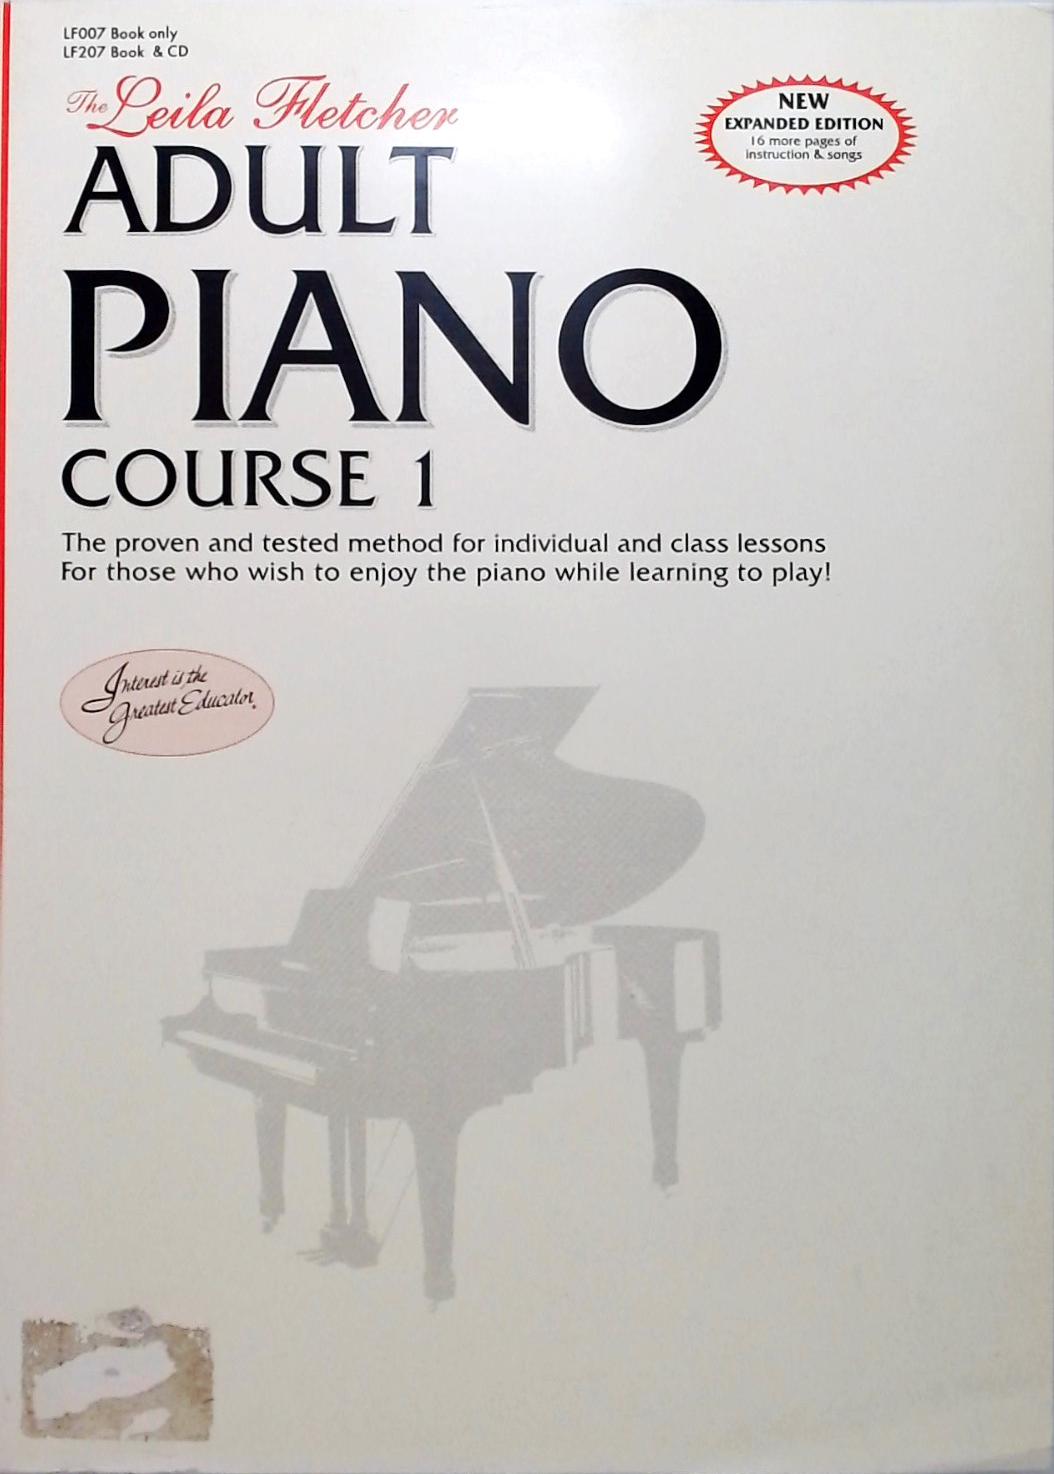 The Leila Fletcher Adult Piano Course - volume 1